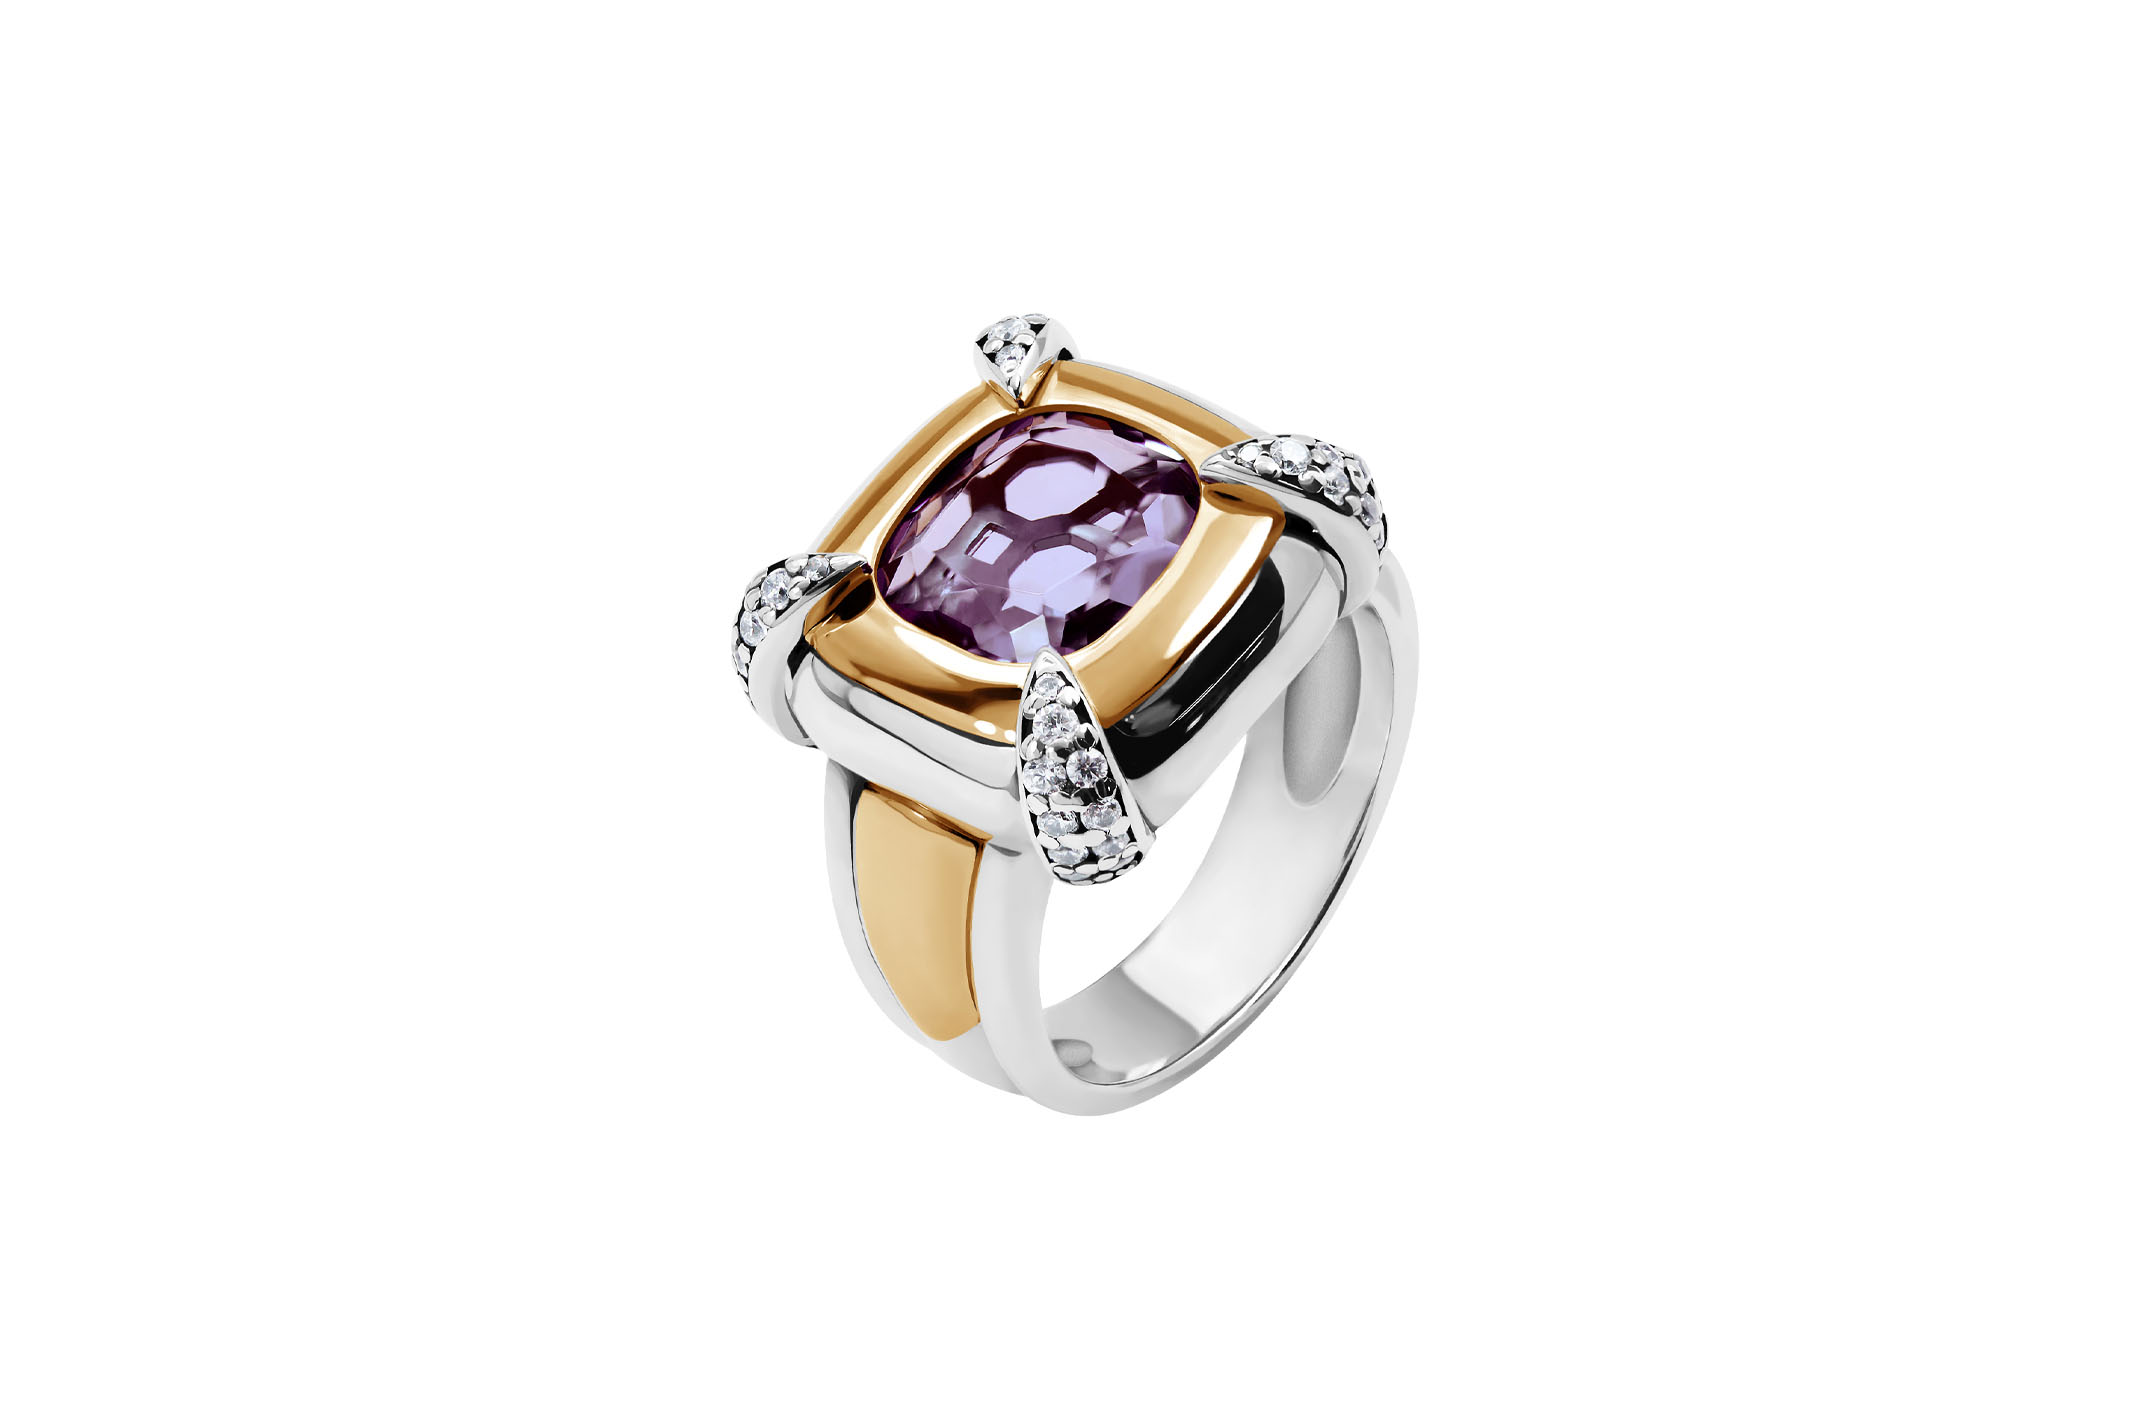 Jewel: ring;Material: 925 silver and 9K gold;Weight: 10.5 gr (silver) and 1.2 gr (gold);Stone: zirconias;Color: white and yellow;Gender: woman